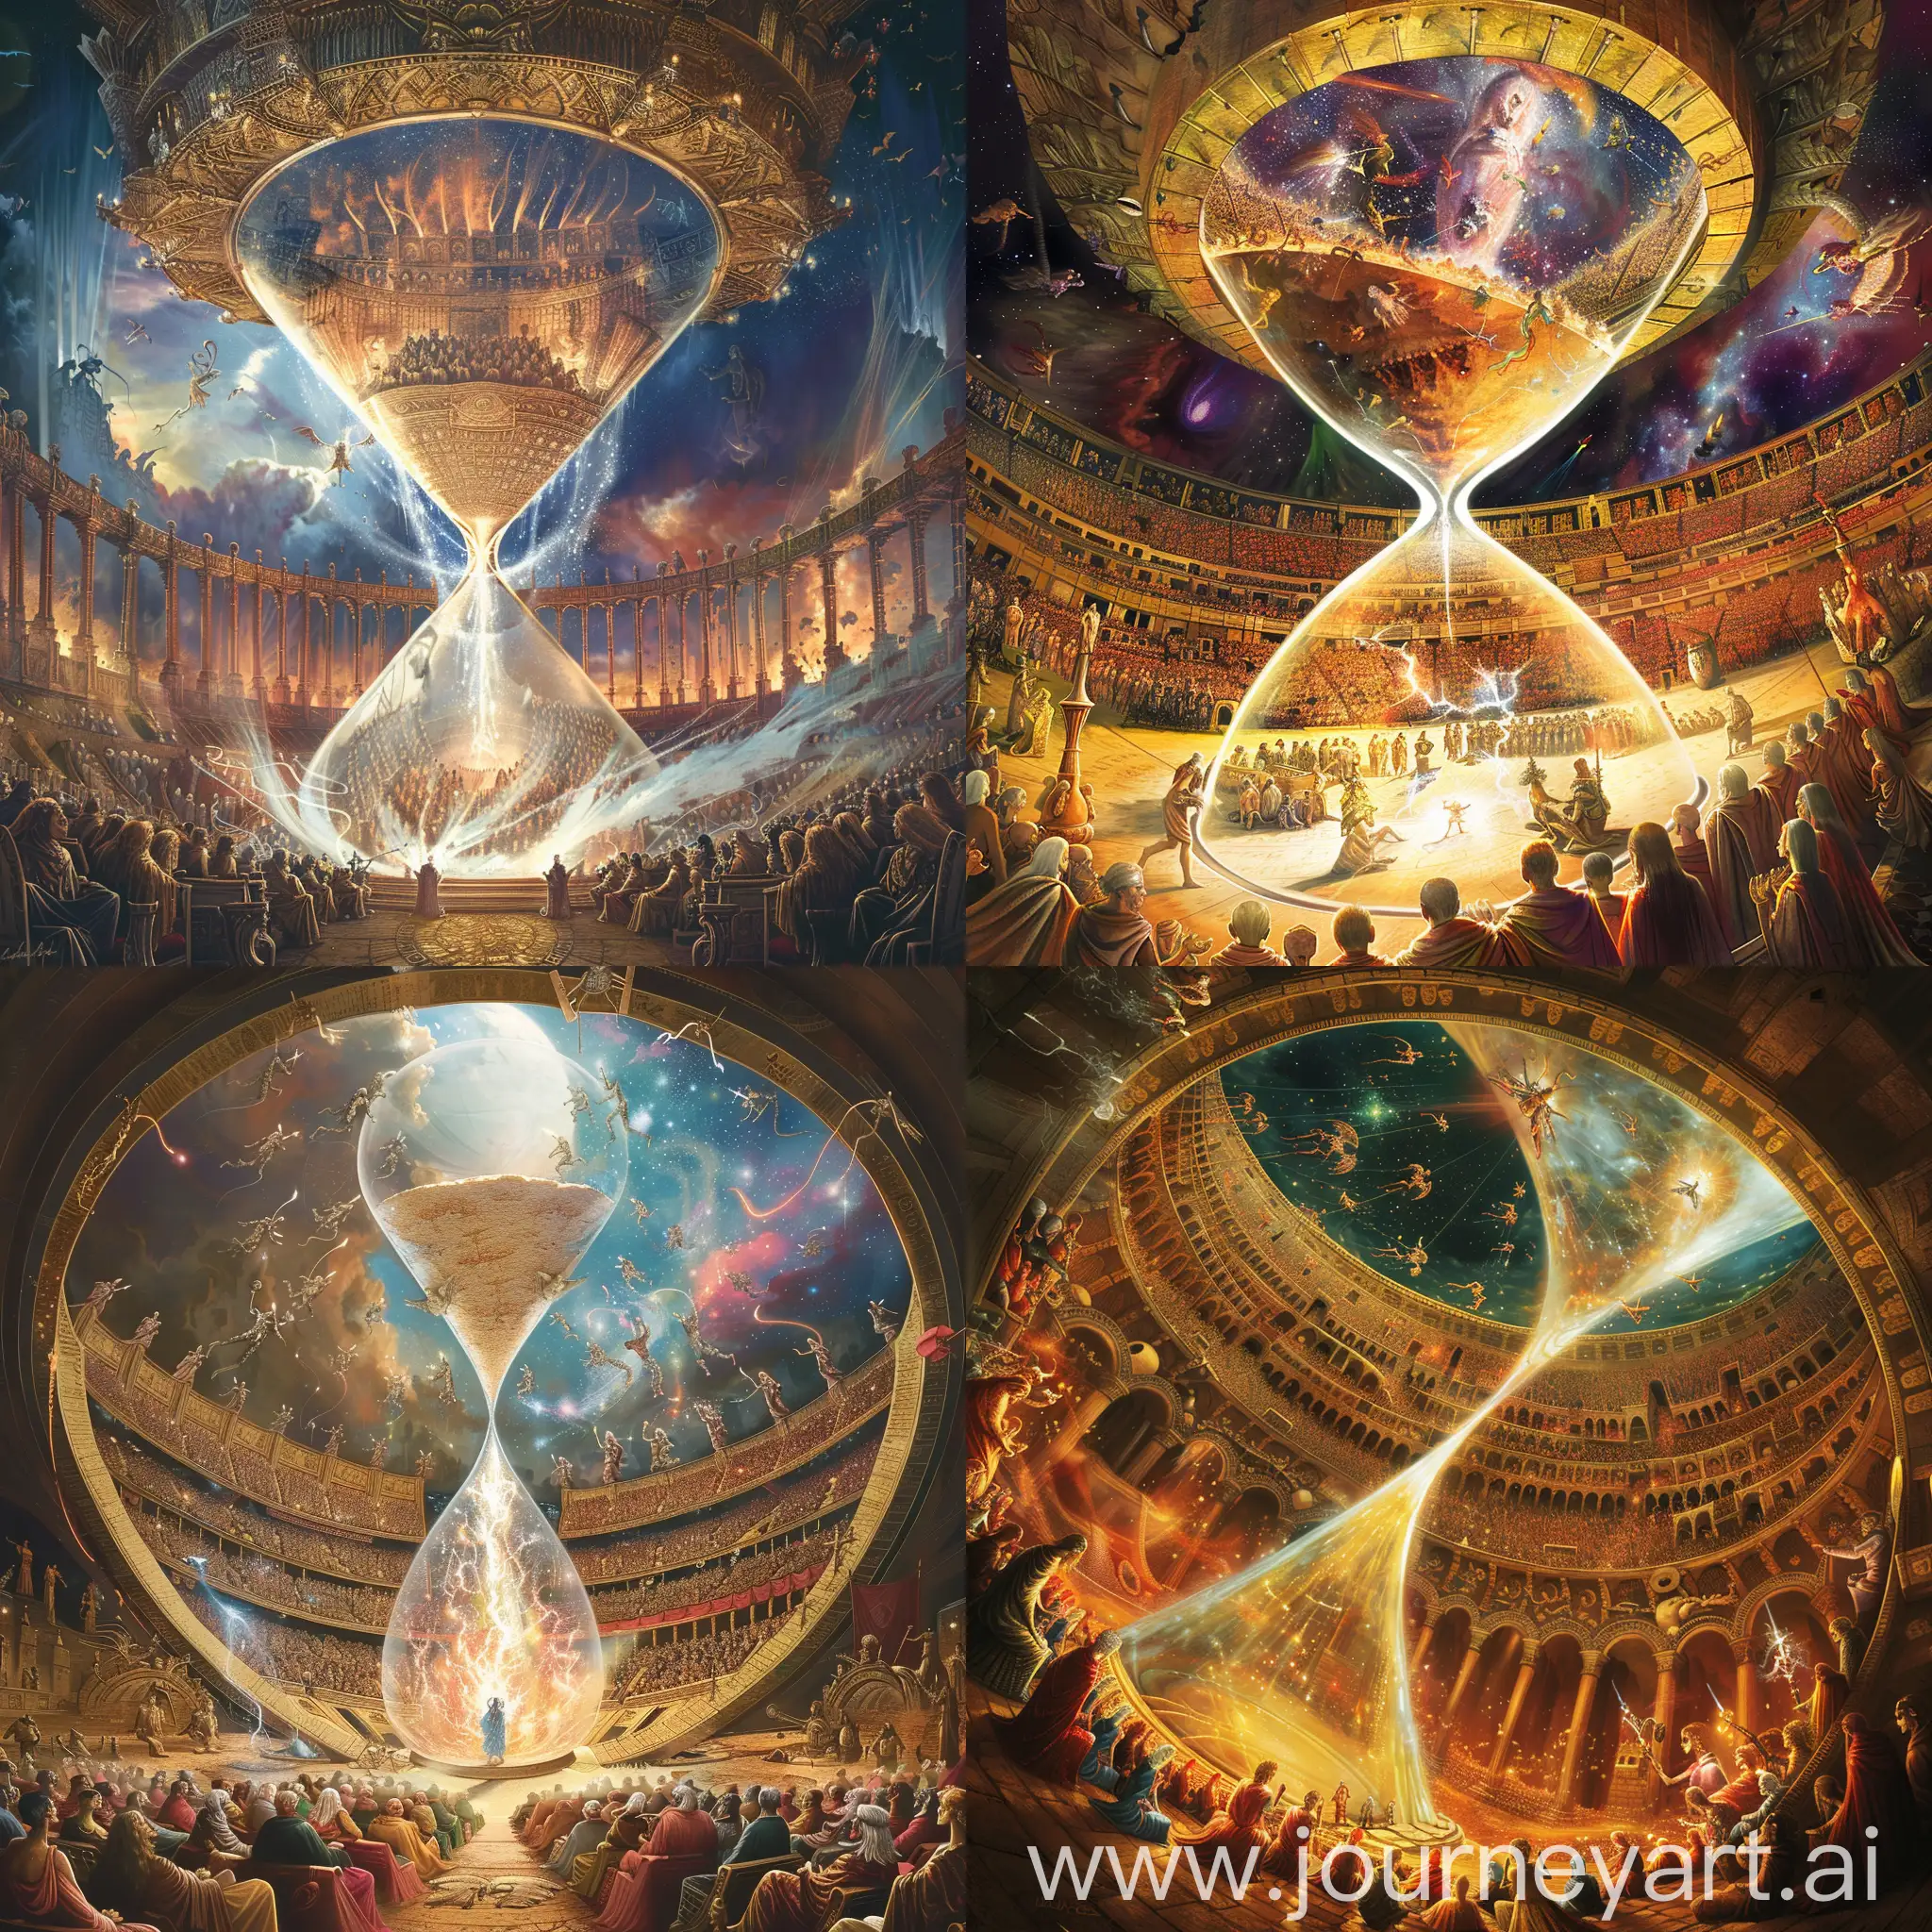 a huge coliseum inside an inverted hourglass with gods and beings from various dimensions seated all around, and divine energy flowing in from the cosmos